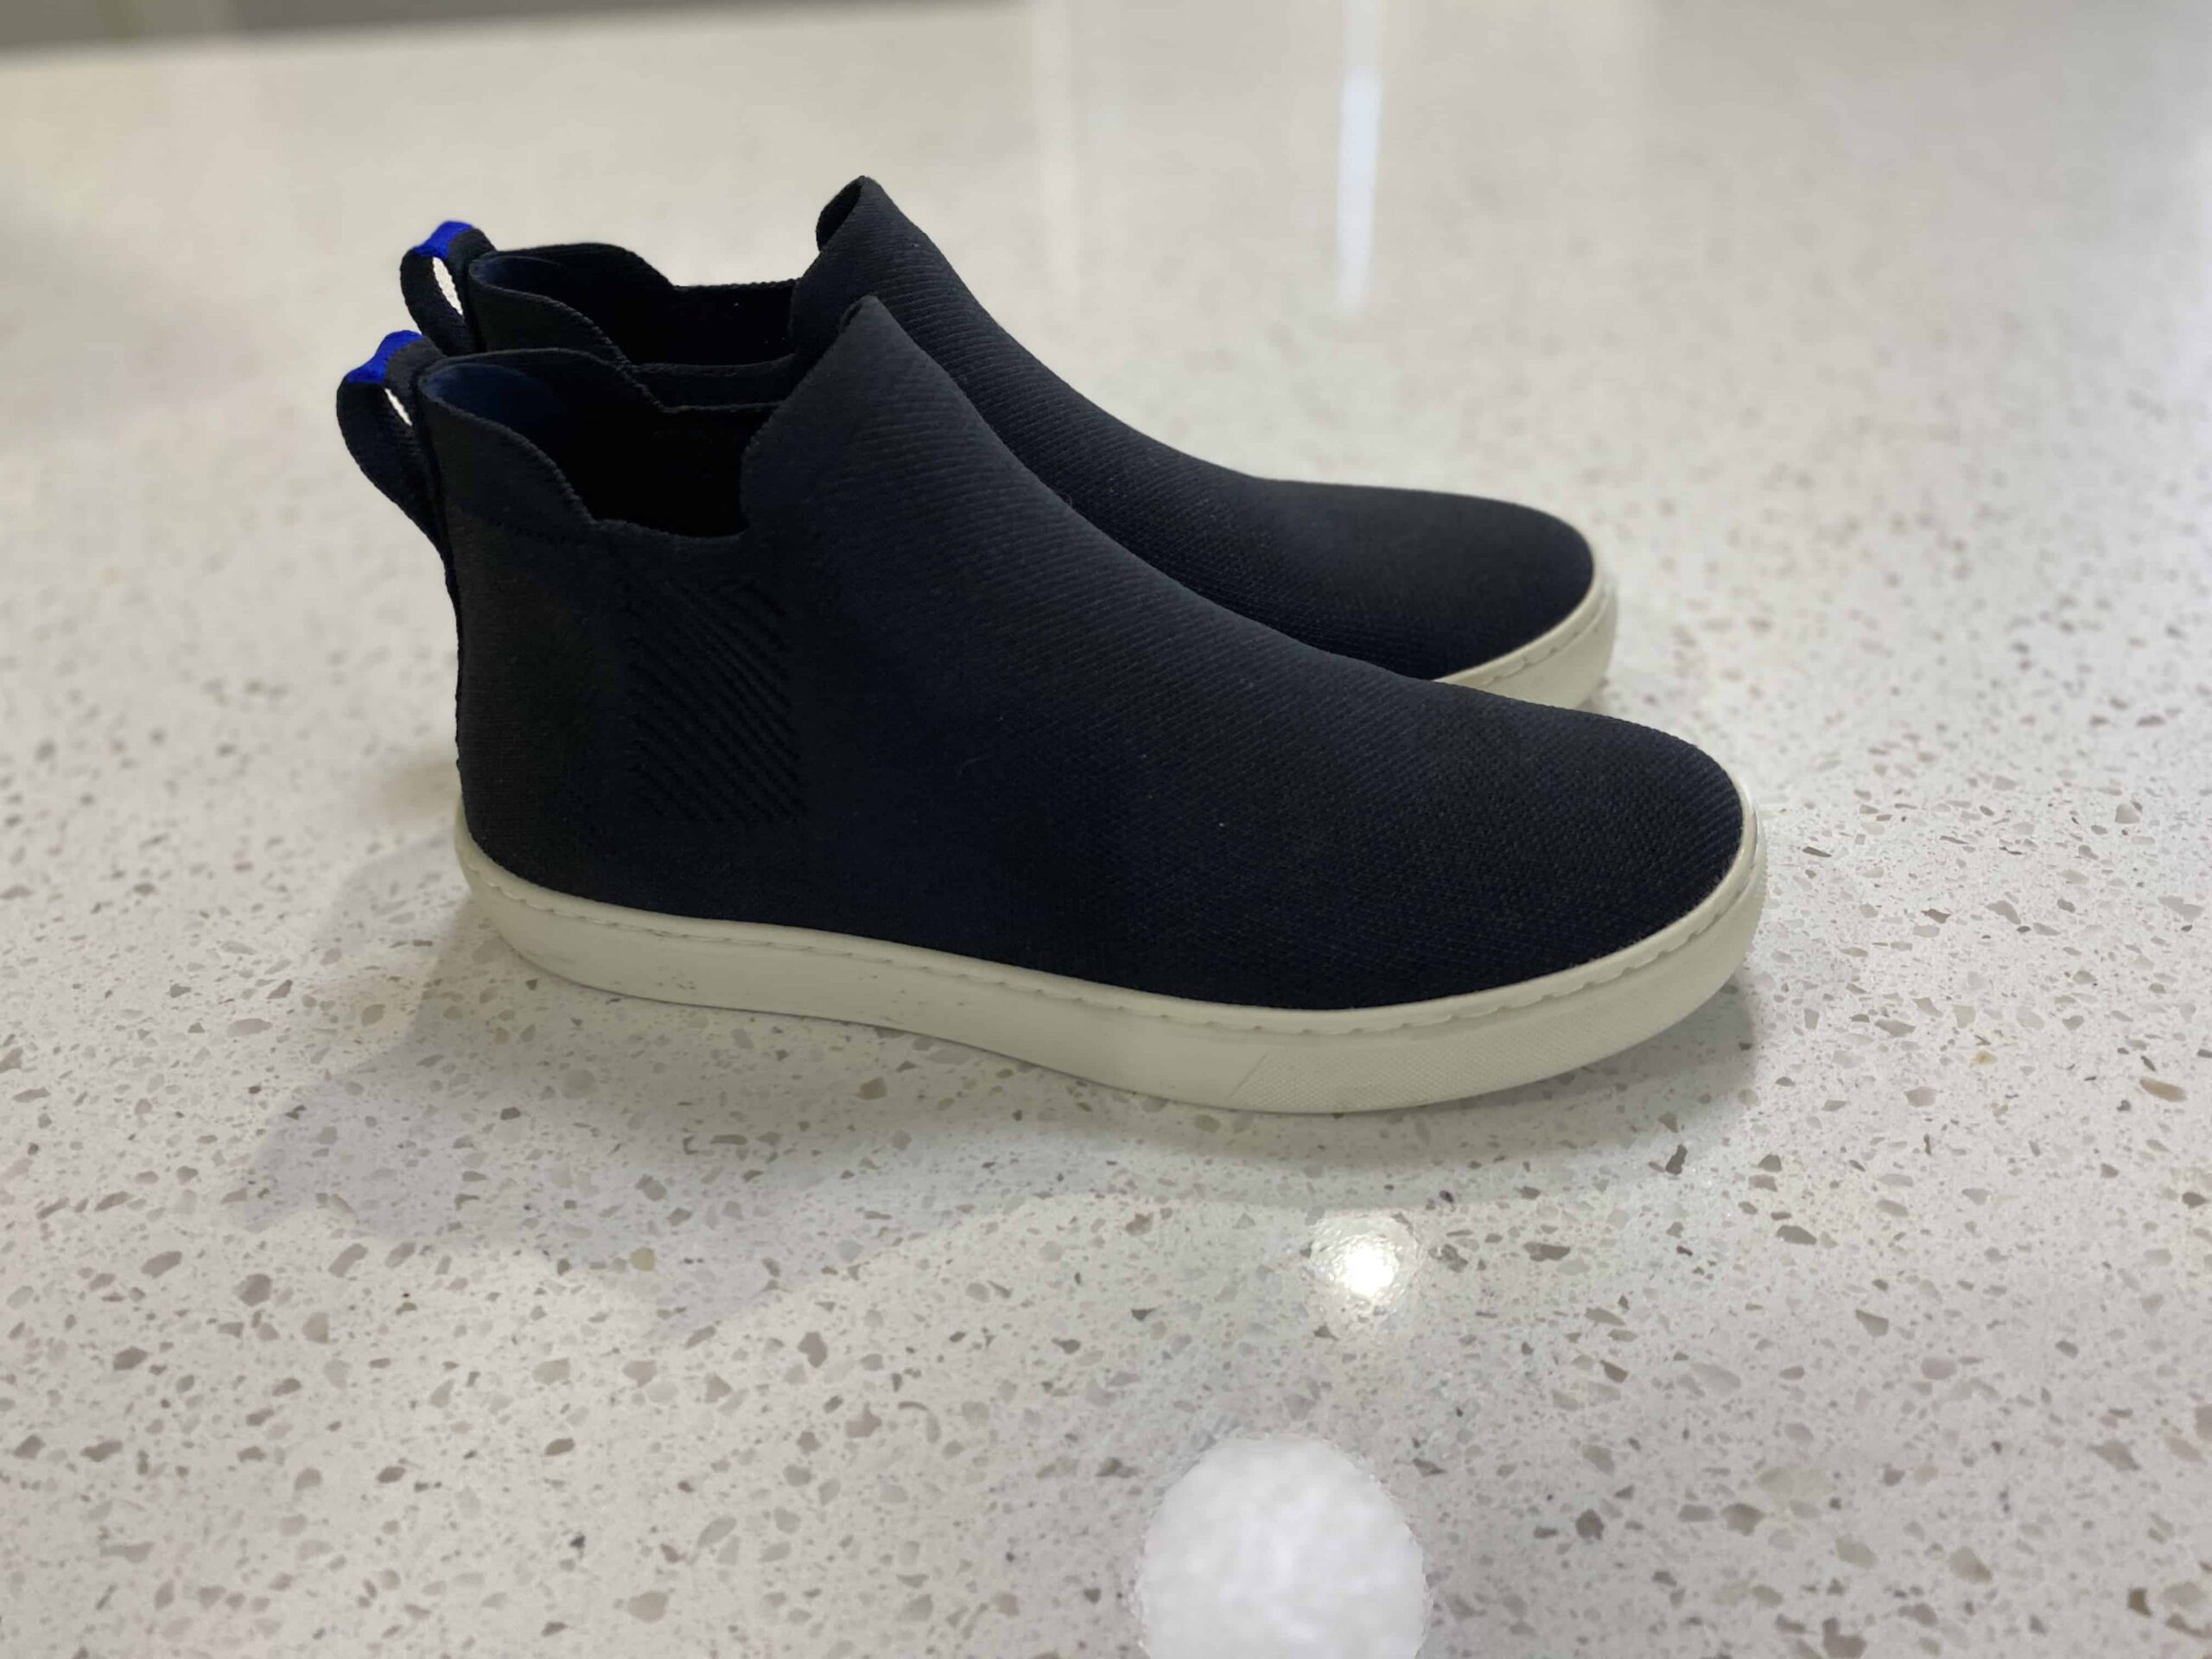 Rothy's Chelsea Boot Review: Reviewing 